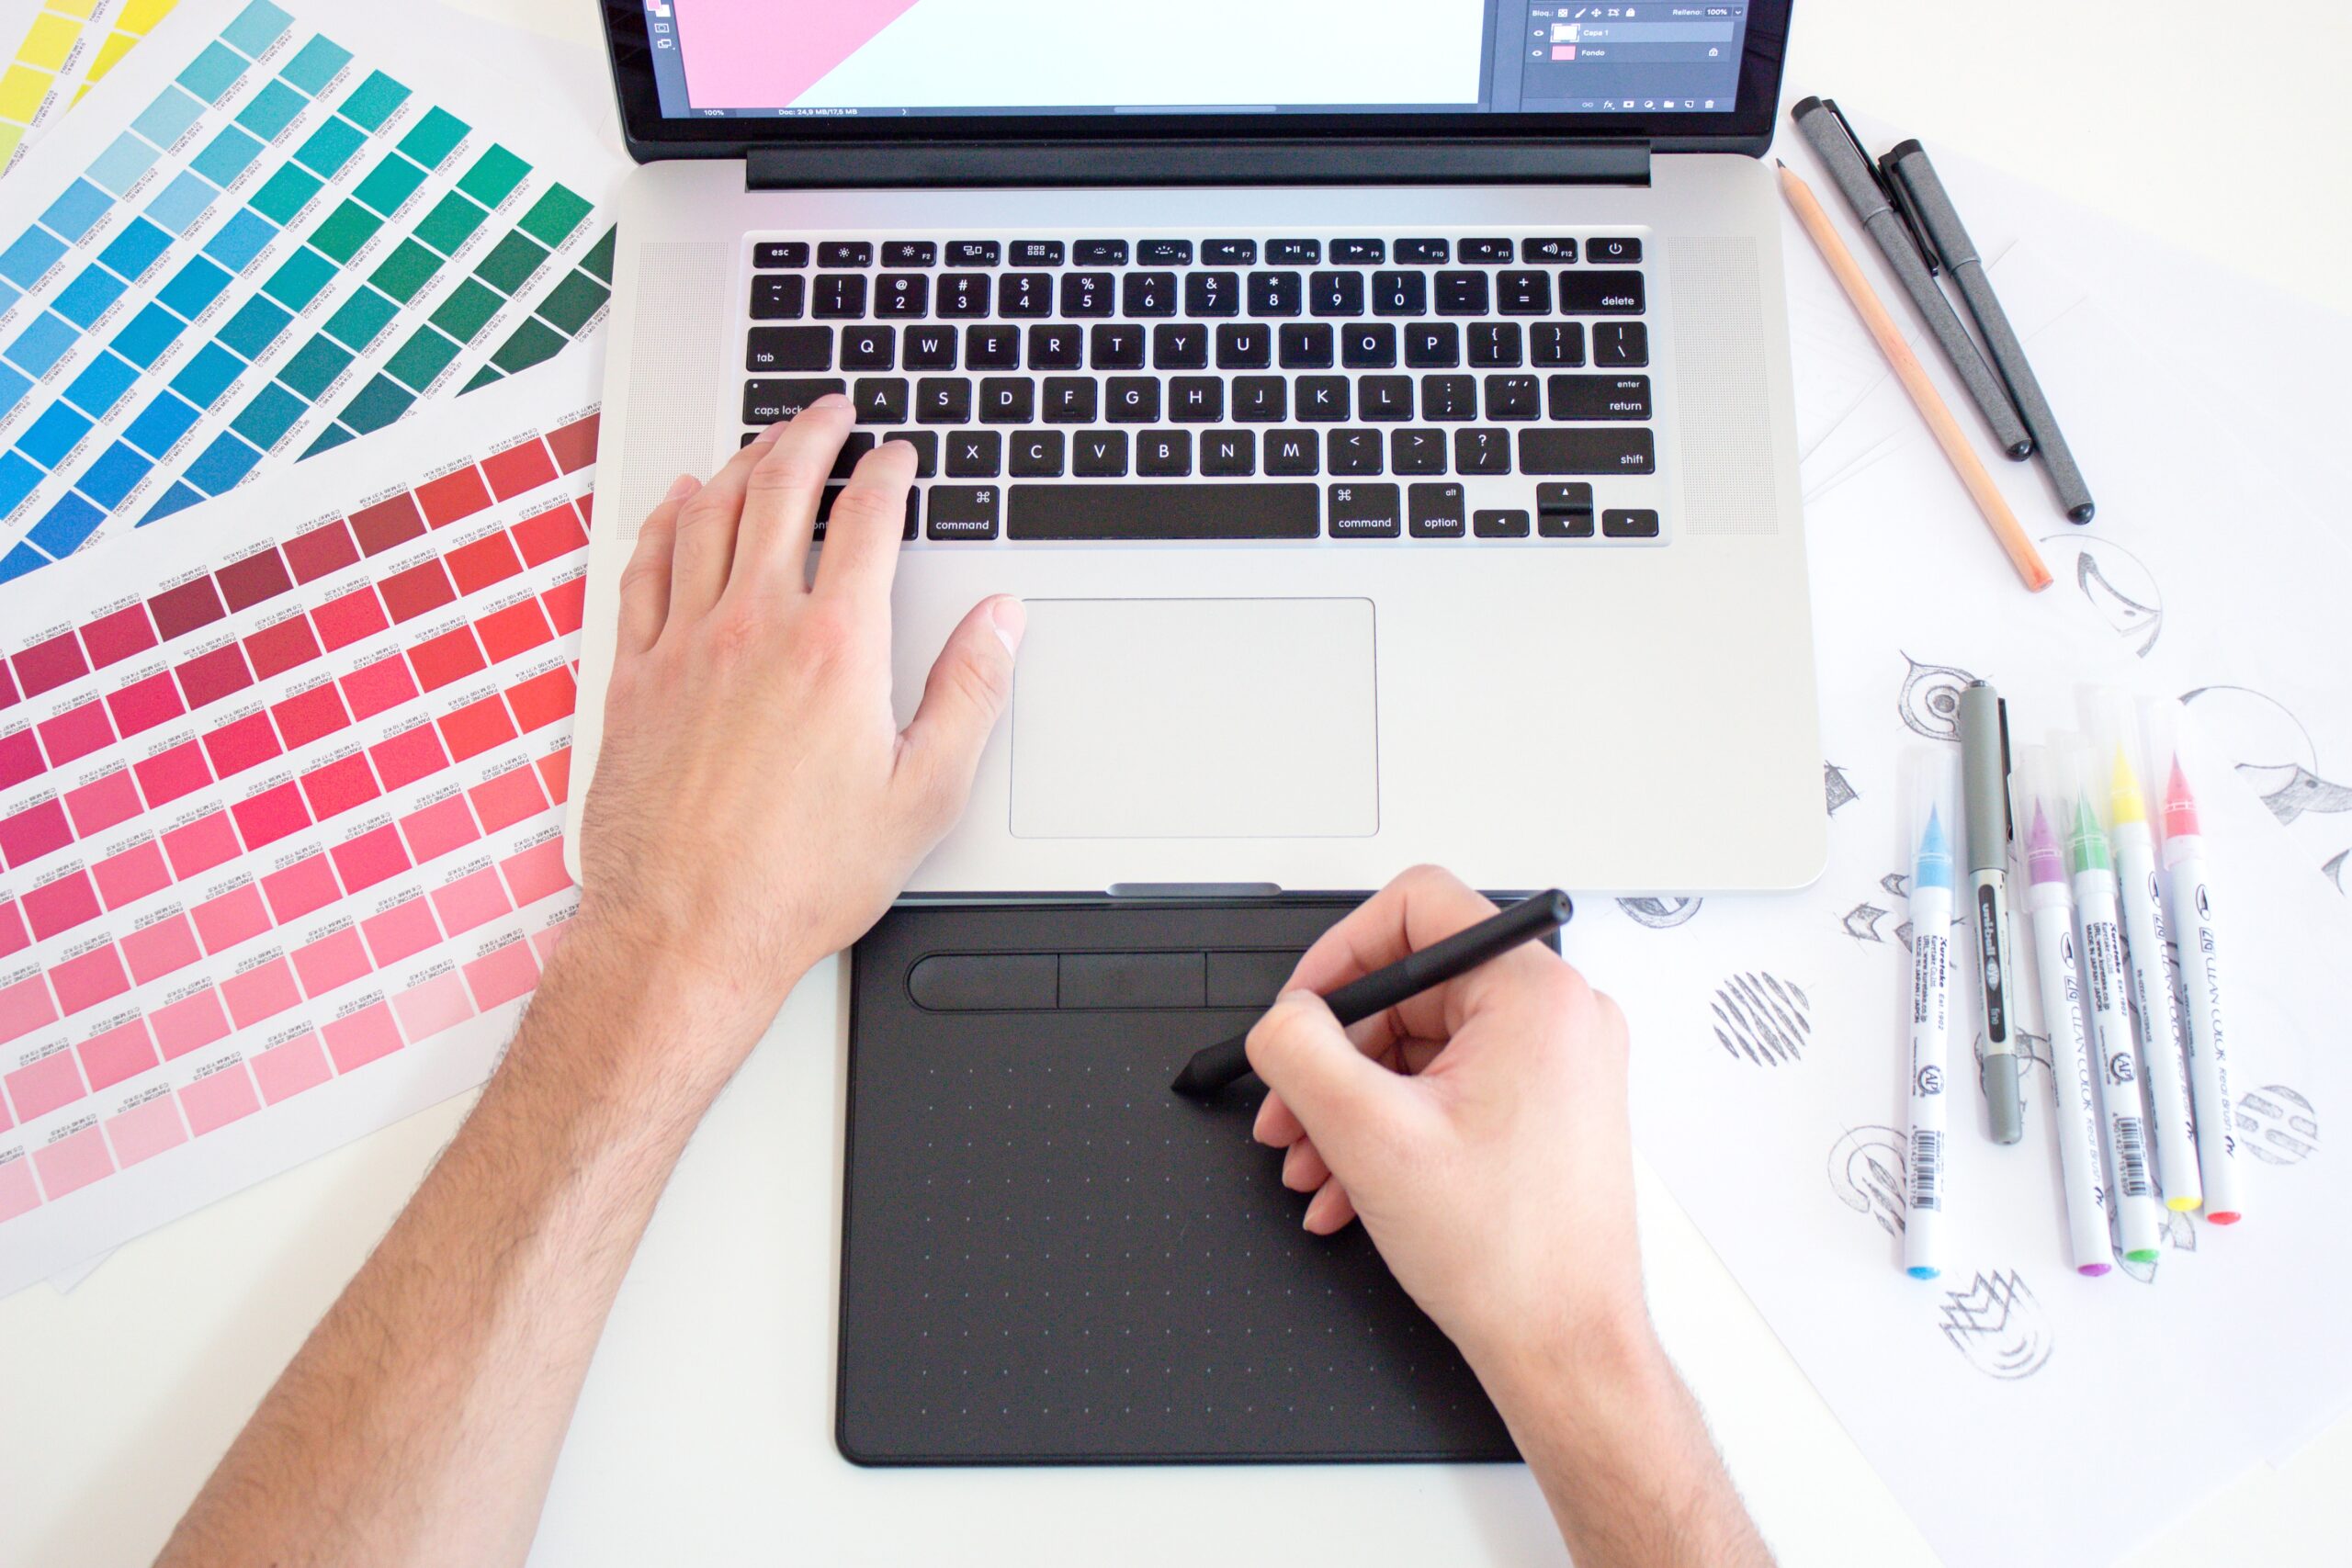 Graphic designer working on a Macbook laptop using a trackpad, color charts and markers